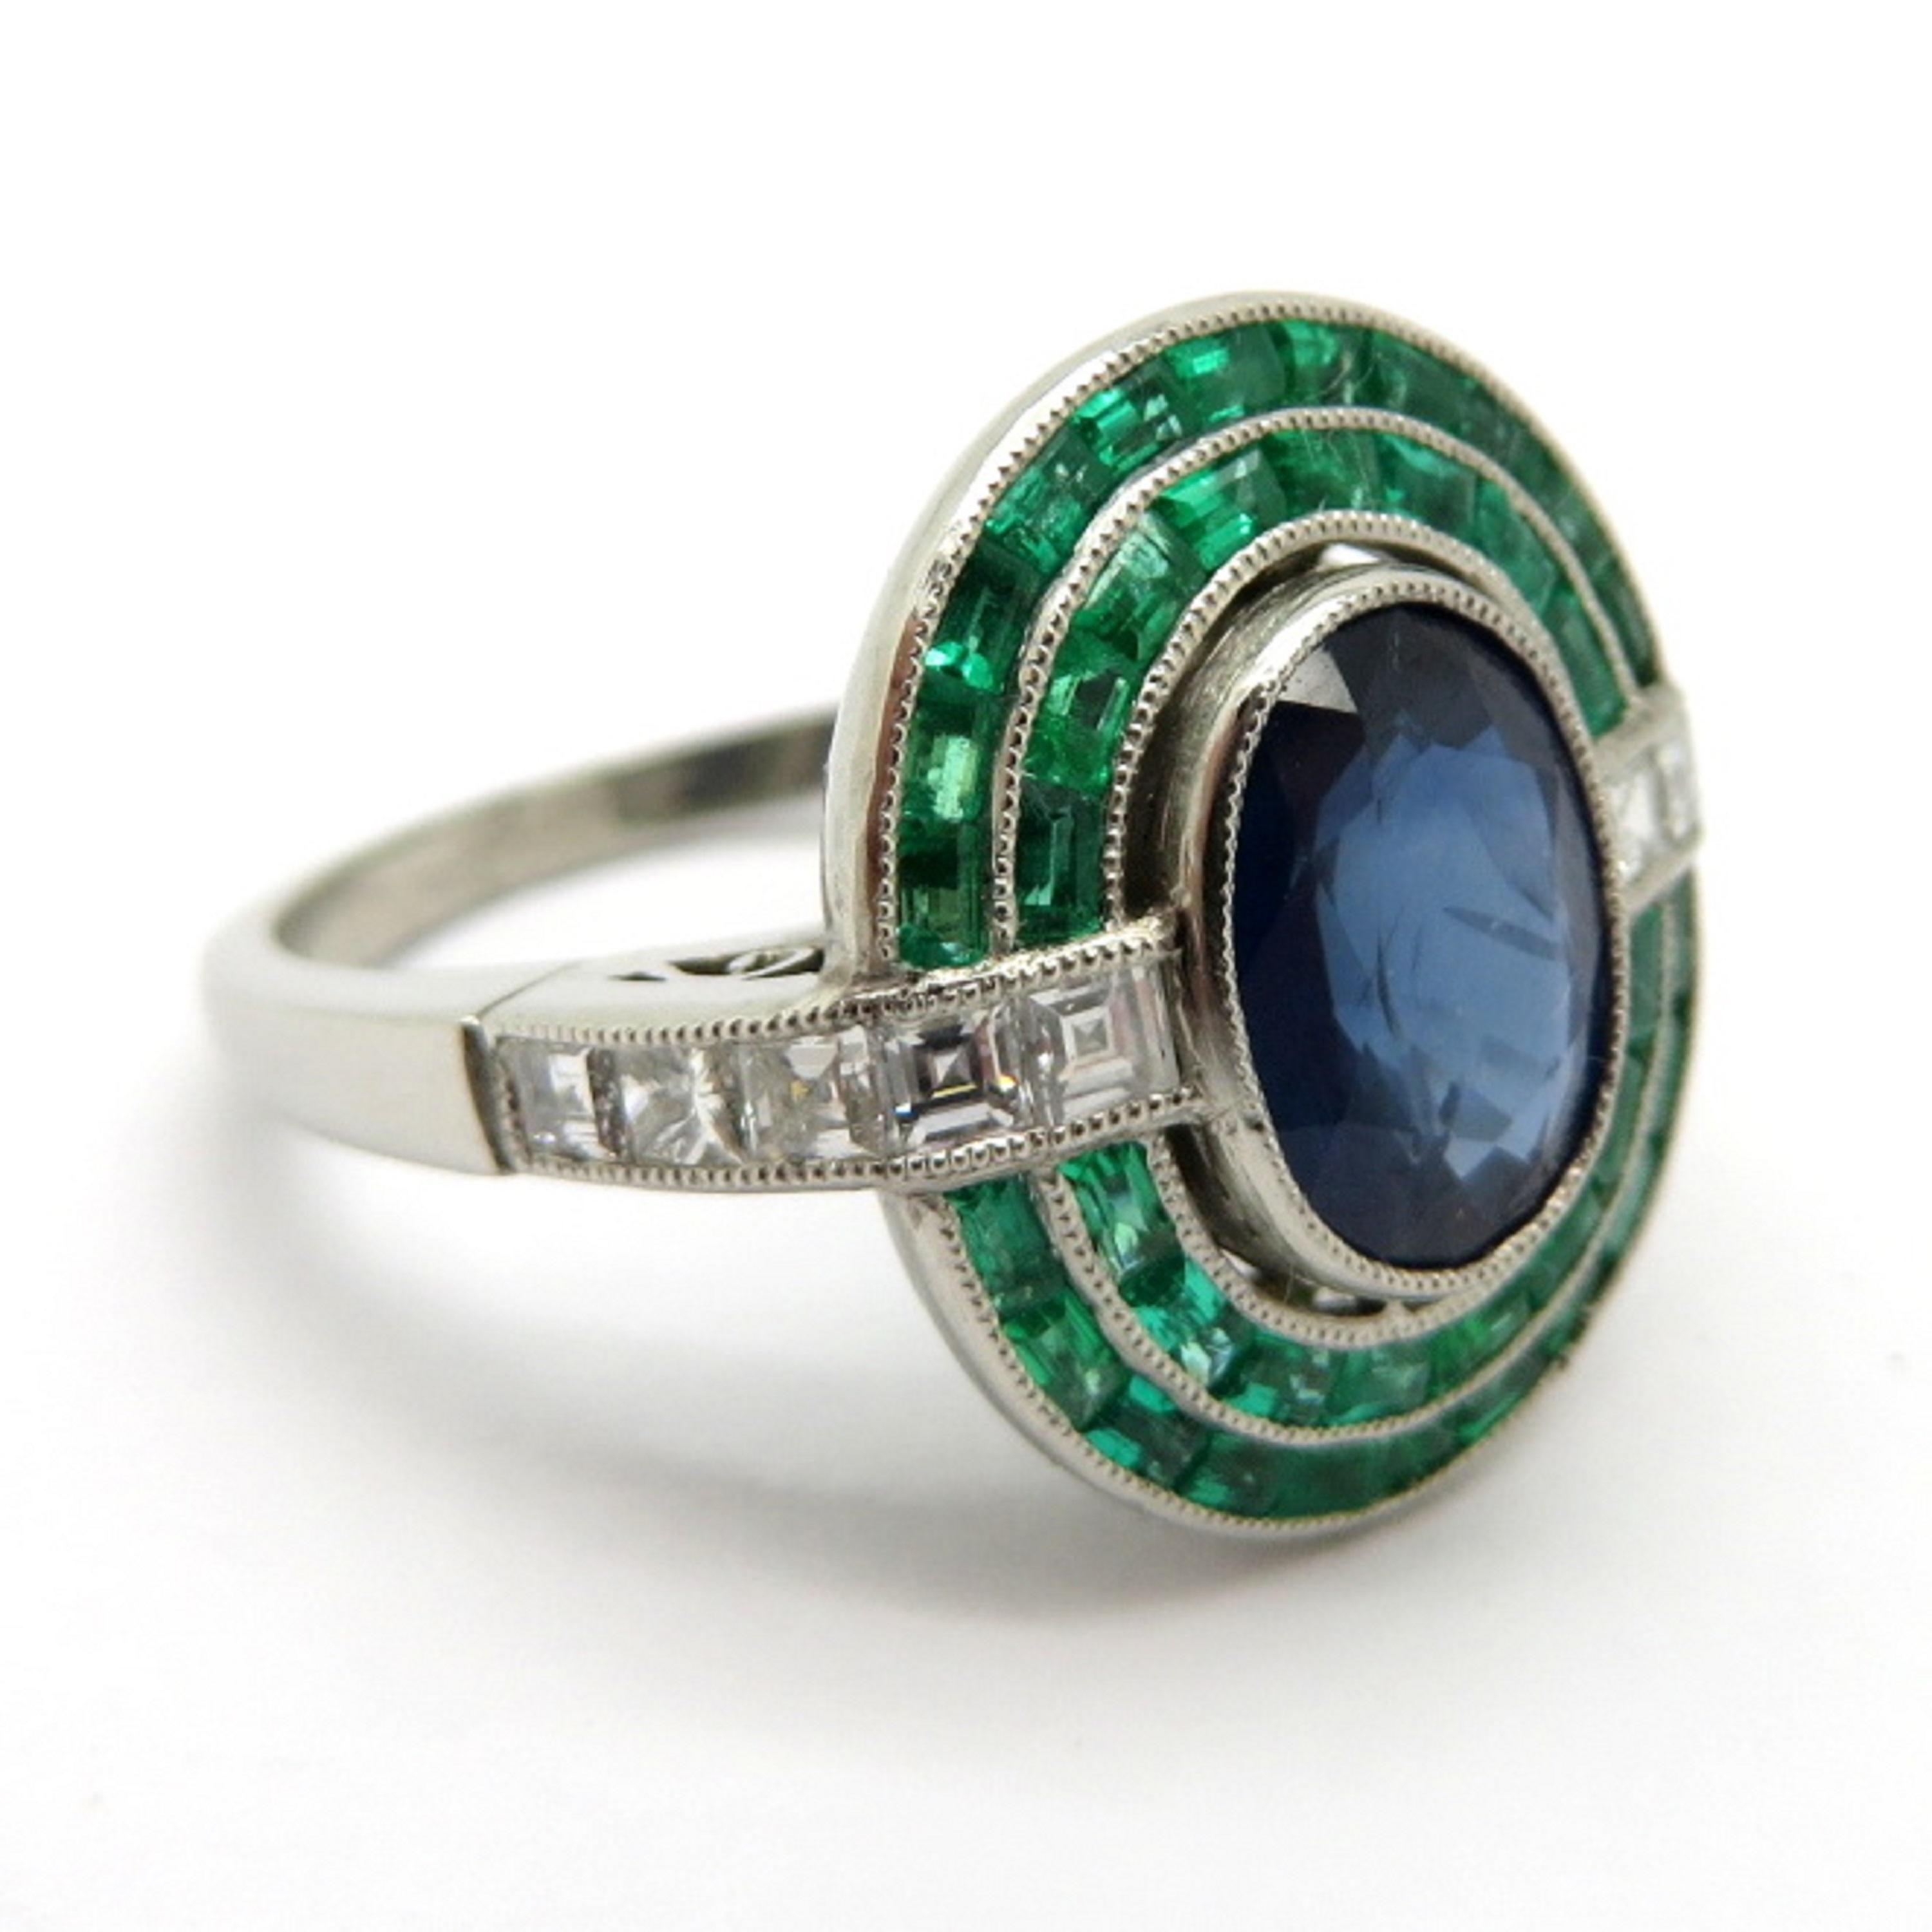 For sale is a beautiful estate Platinum Art Deco Ring with Sapphires, Emeralds and Diamonds!
Showcasing one (1) Oval Brilliant cut natural fine quality blue Sapphire, bezel set in a milgrain border, weighing approximately 2.07 carats.
Surrounding